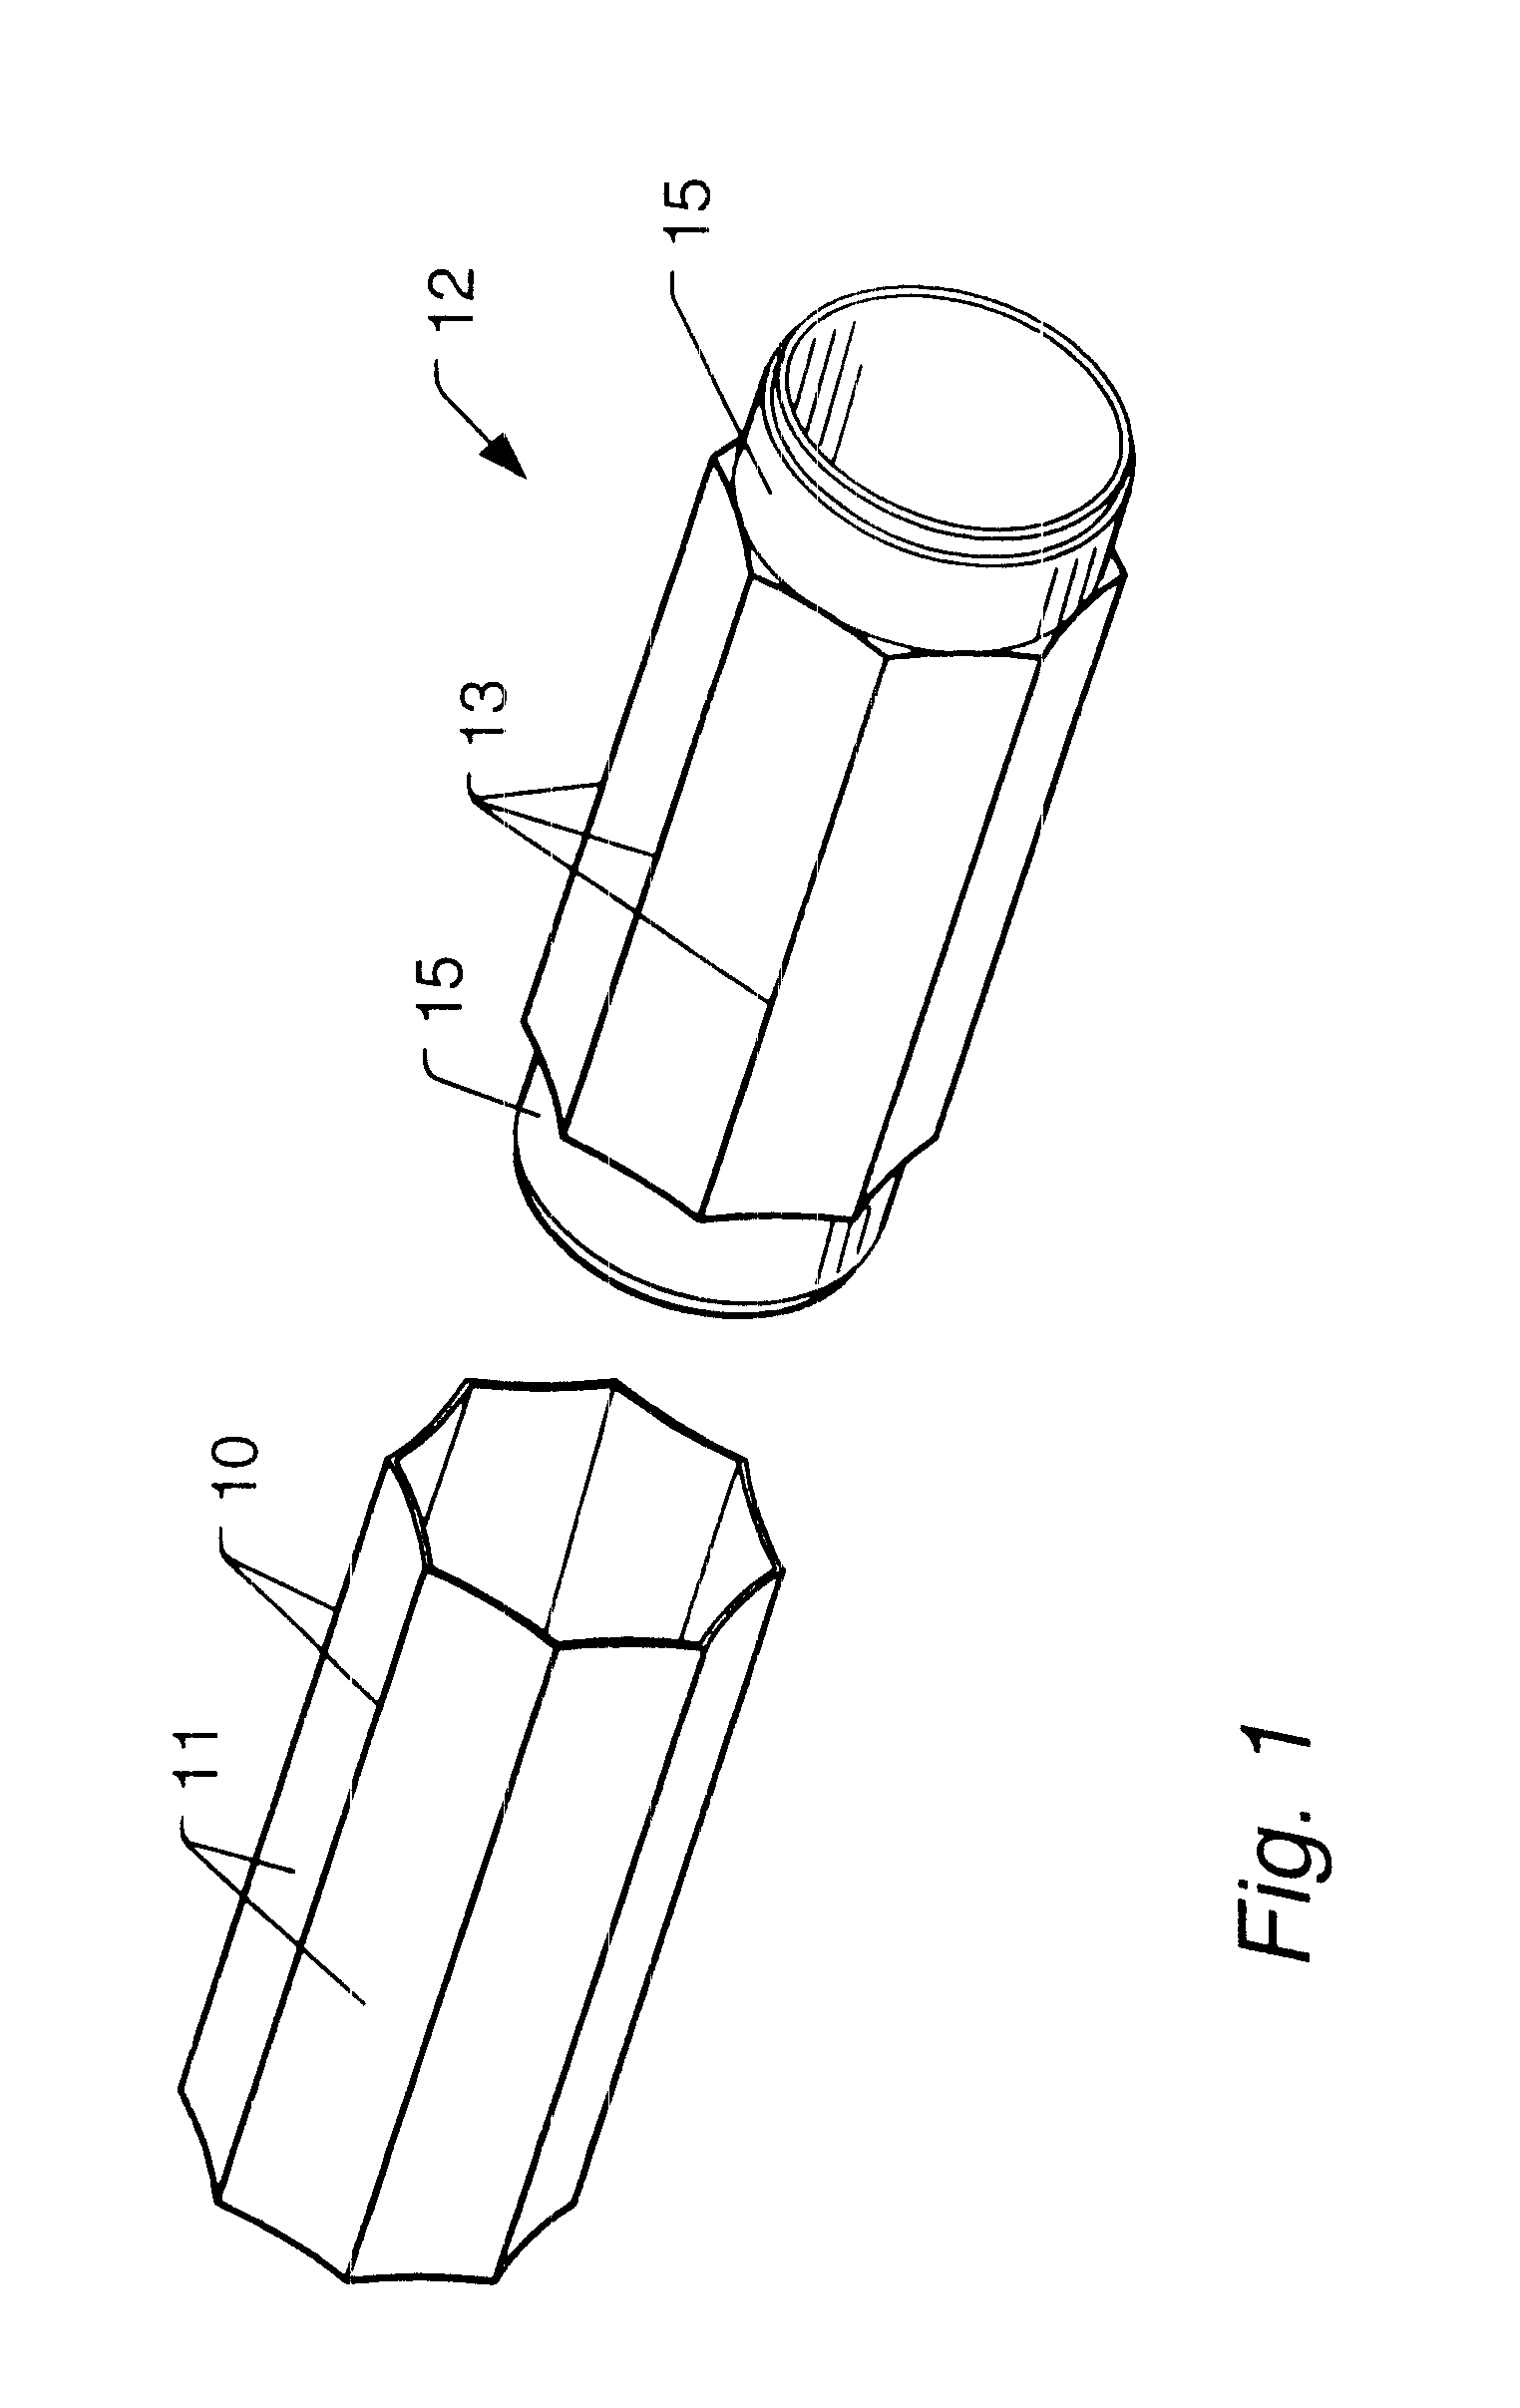 Method and apparatus for a non-oil-filled towed array with a novel hydrophone design and uniform buoyancy technique